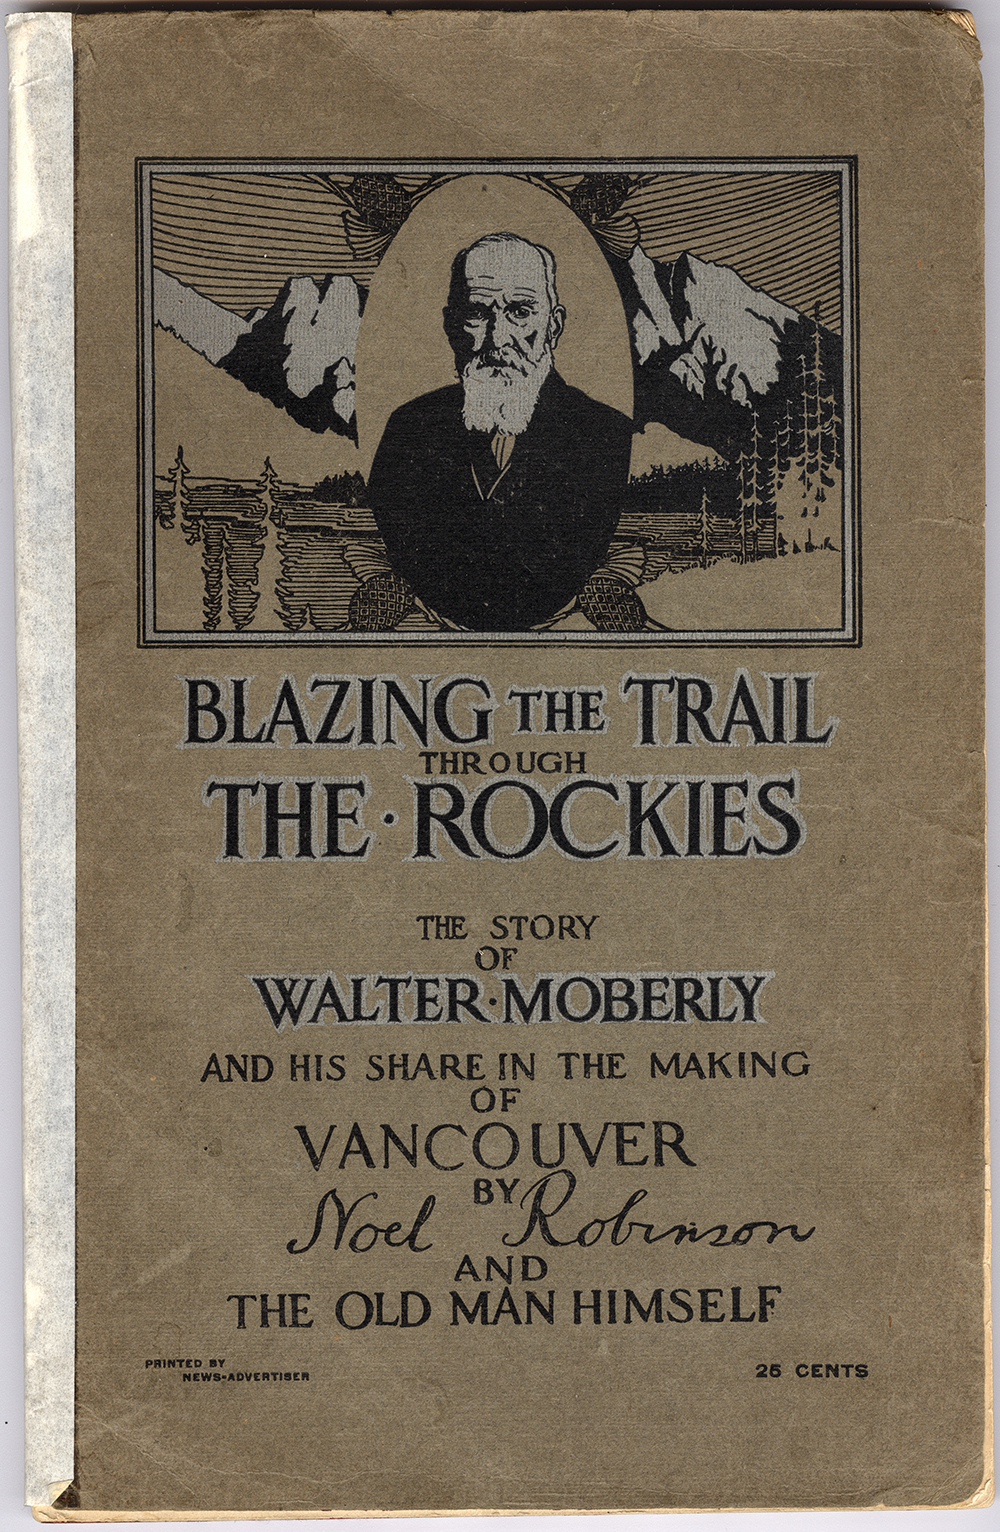 The front cover of the book “Blazing the Trail through the Rockies: The Story of Walter Moberly and His Share in the Making of Vancouver.” The cover is green and features an oval shaped illustrated bust portrait of Walter Moberly.